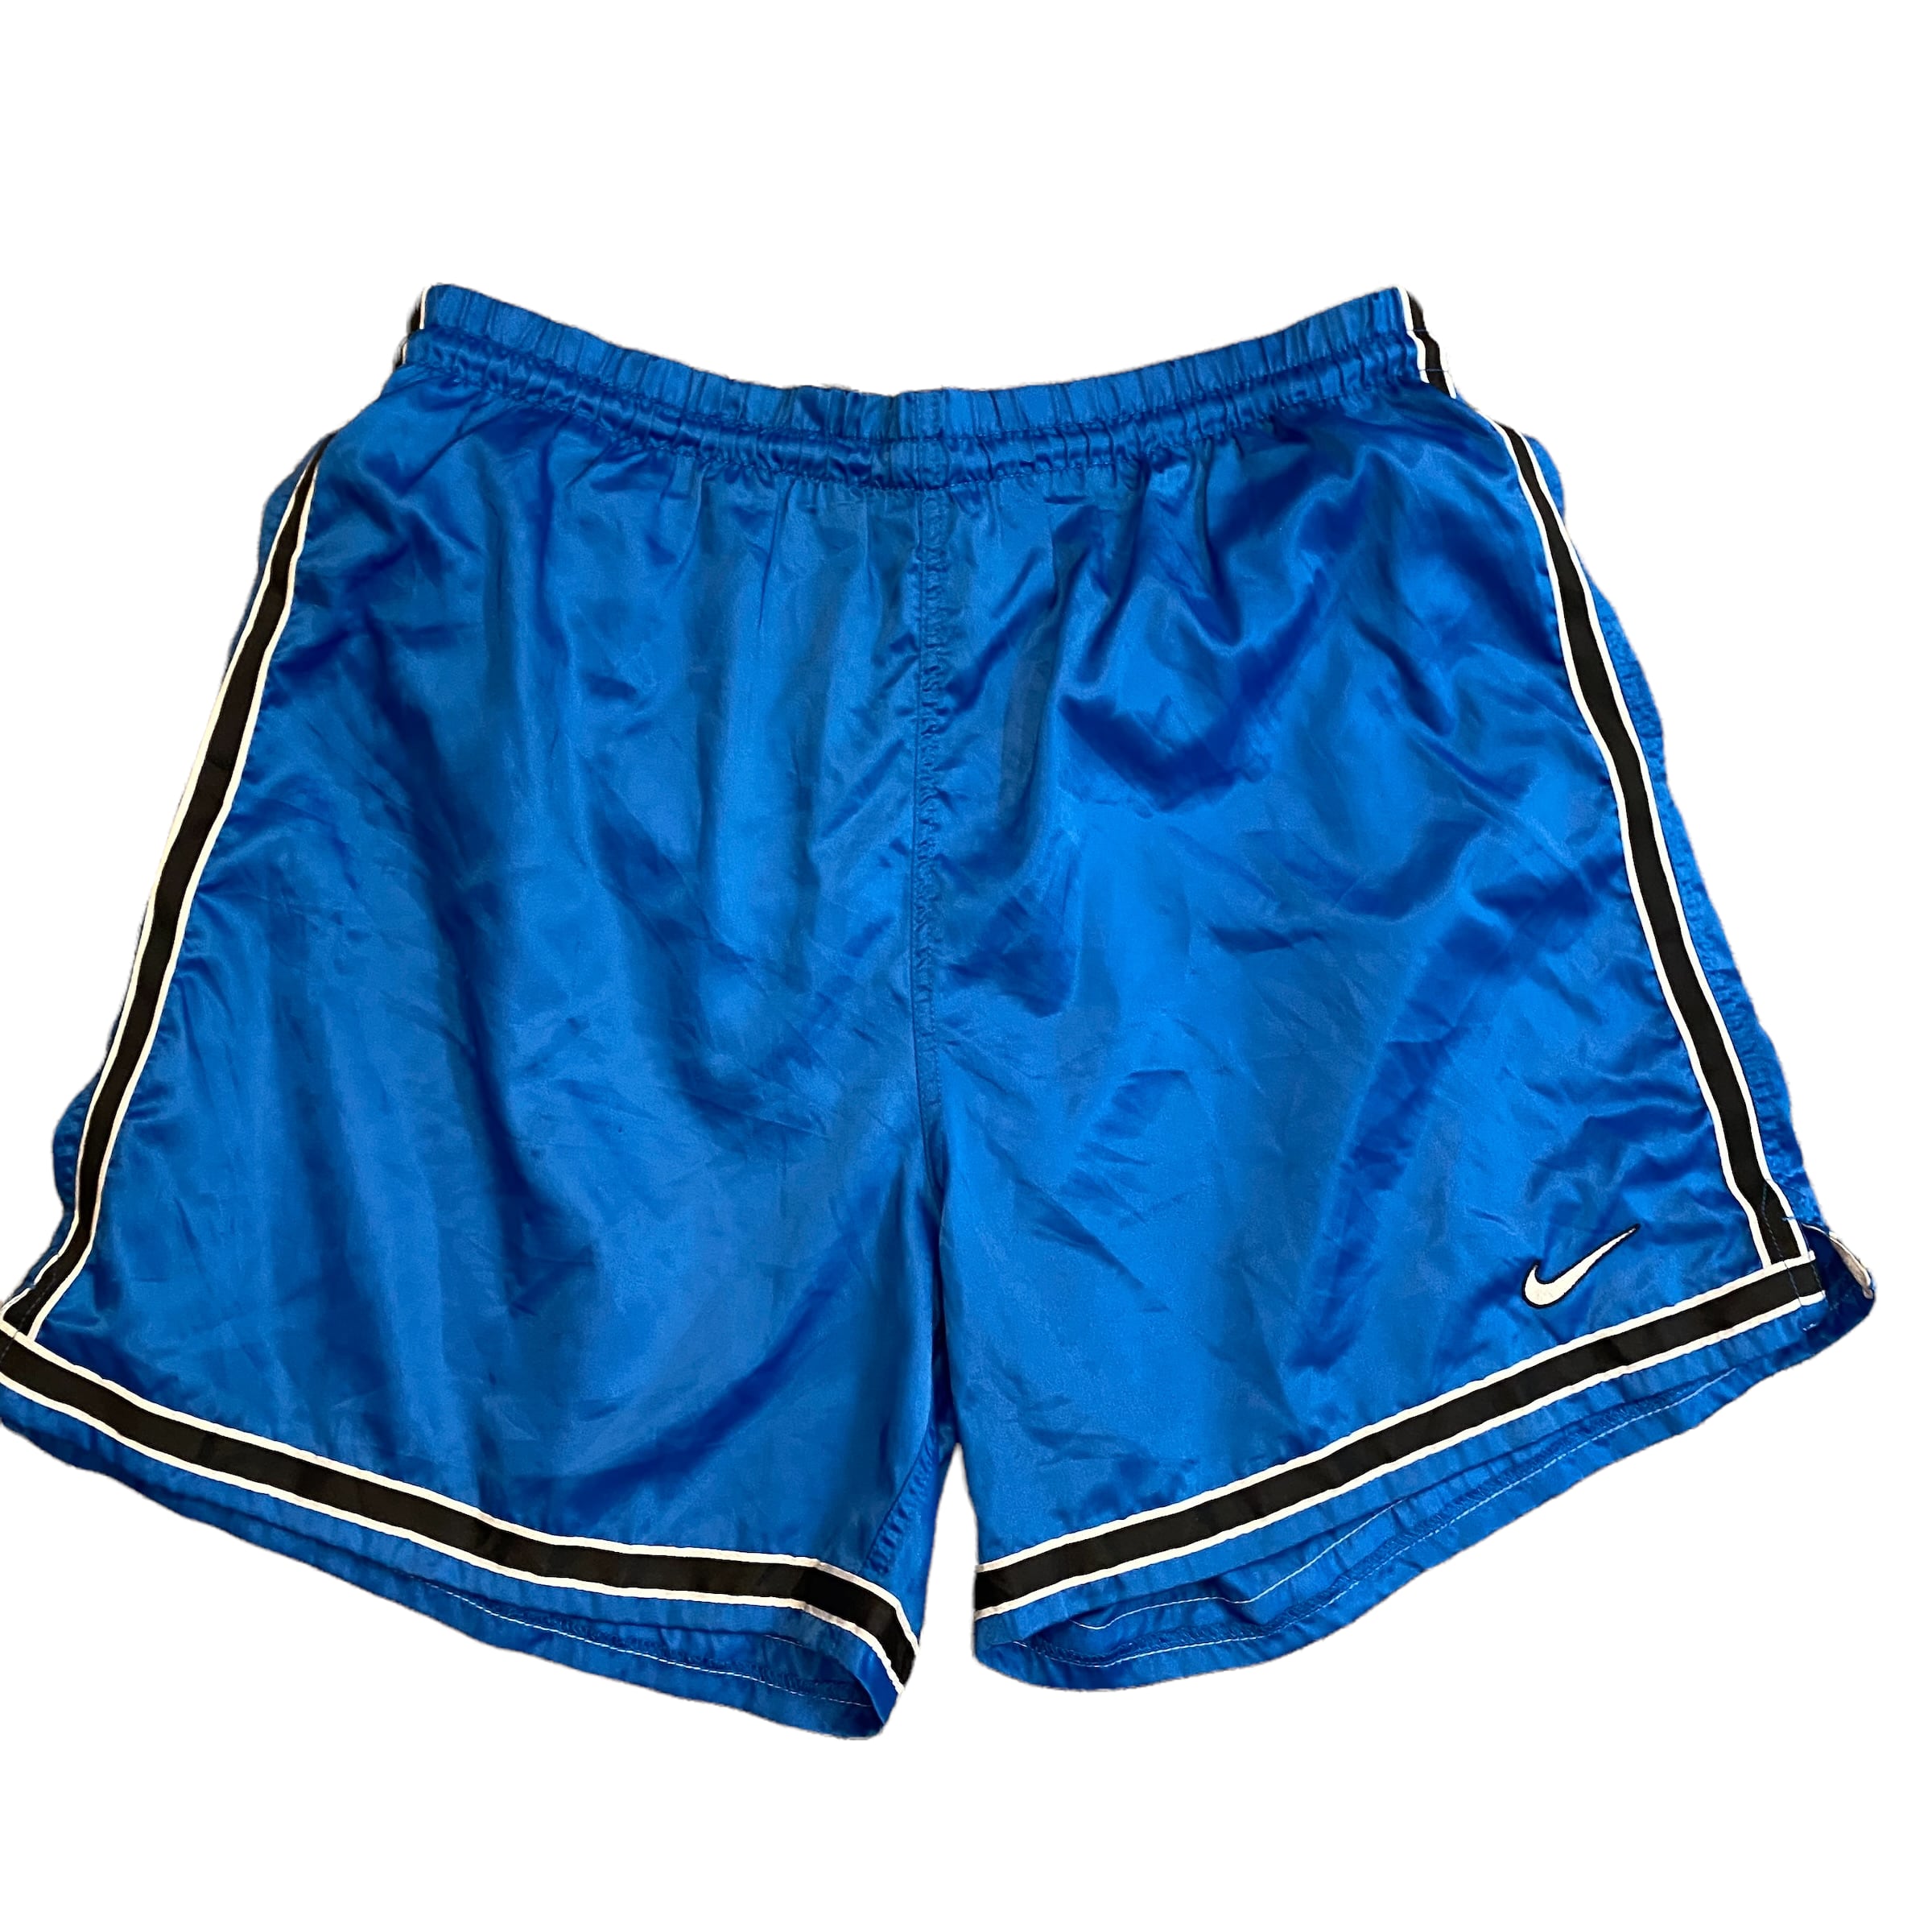 【archive】90s Nike One point logo shorts